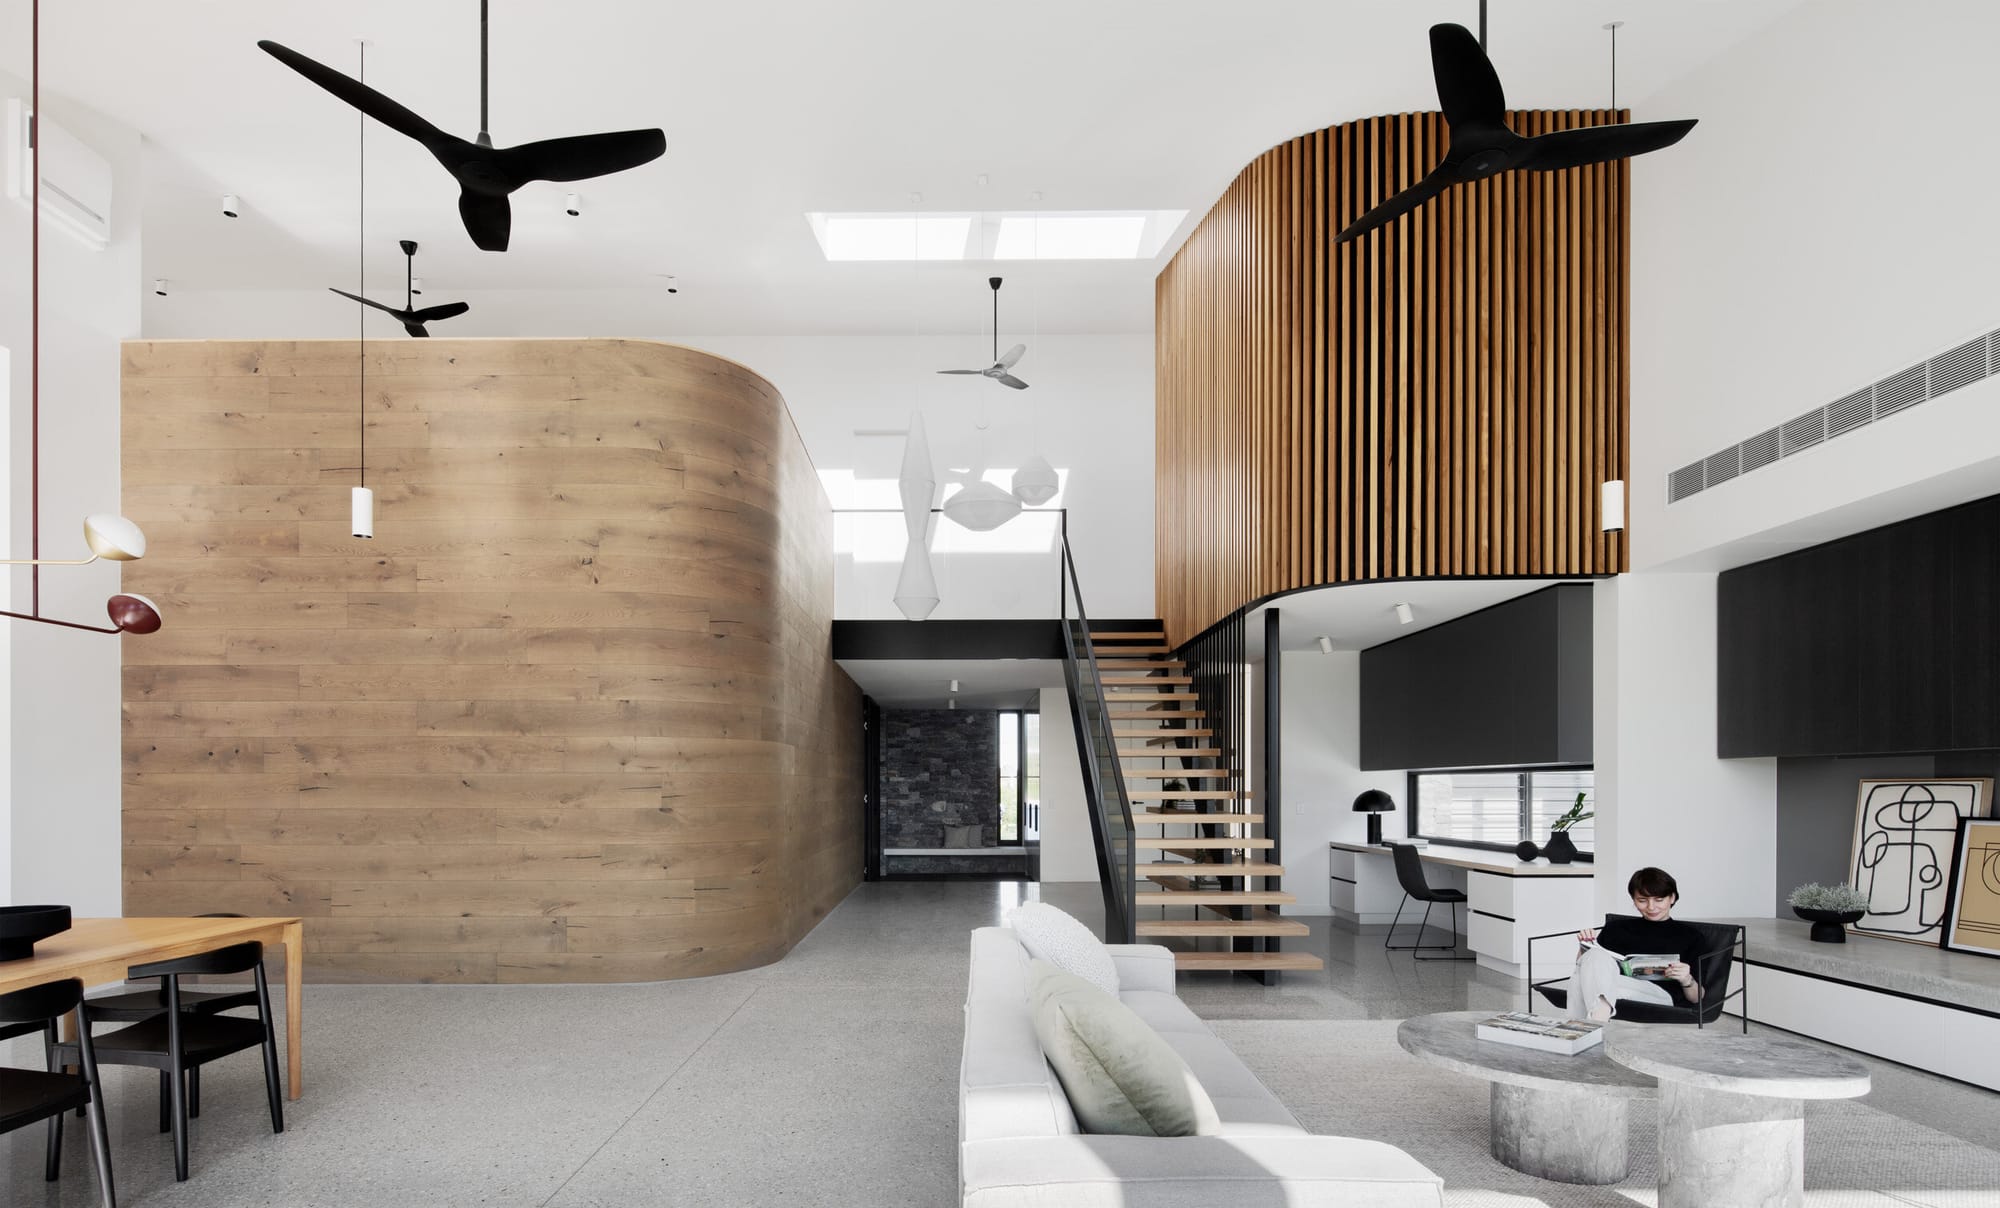 Kenny Street Huse by Chan Architecture. Photography by Tatjana Plitt.  Open plan living, dining and study area with polished concrete floors. Floating, curved, timber clad wall hangs over void above study area. 